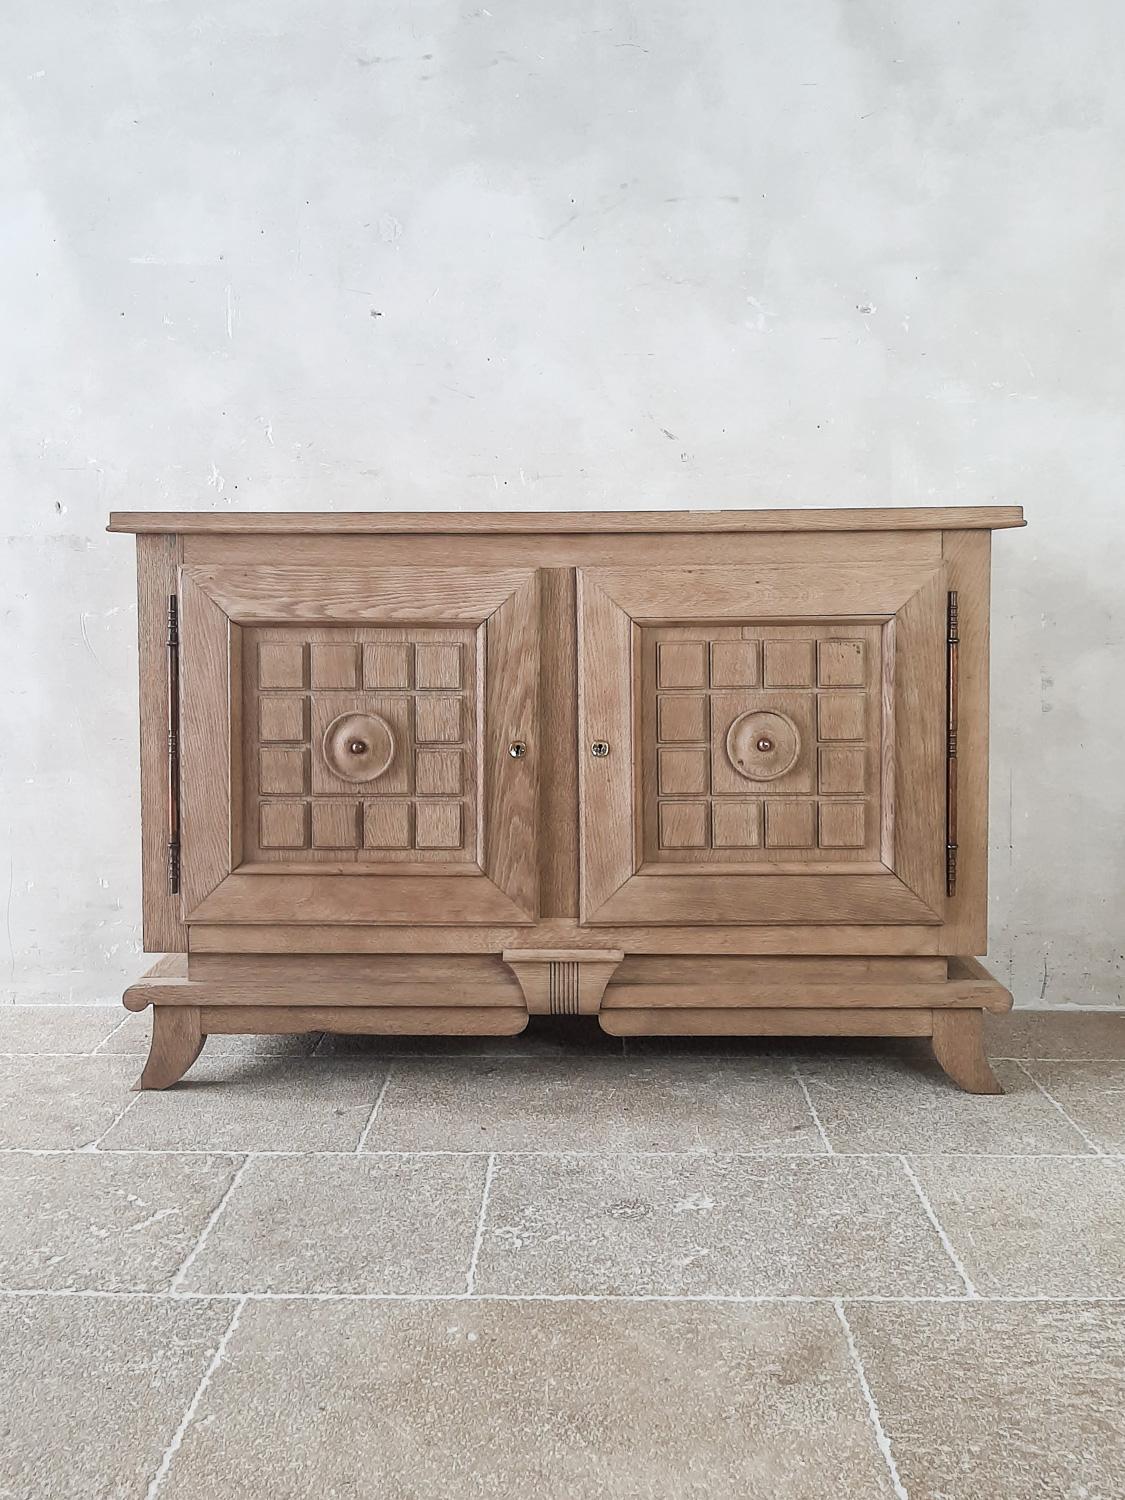 Bleached oak vintage credenza by Charles Dudouyt from the 1940s. Stunning midcentury sideboard with two paneled doors with the typical geometrical shapes of Charles Dudouyt. The top has a wooden chequerboard pattern.

Measures: H 94 x W 146 x D 50